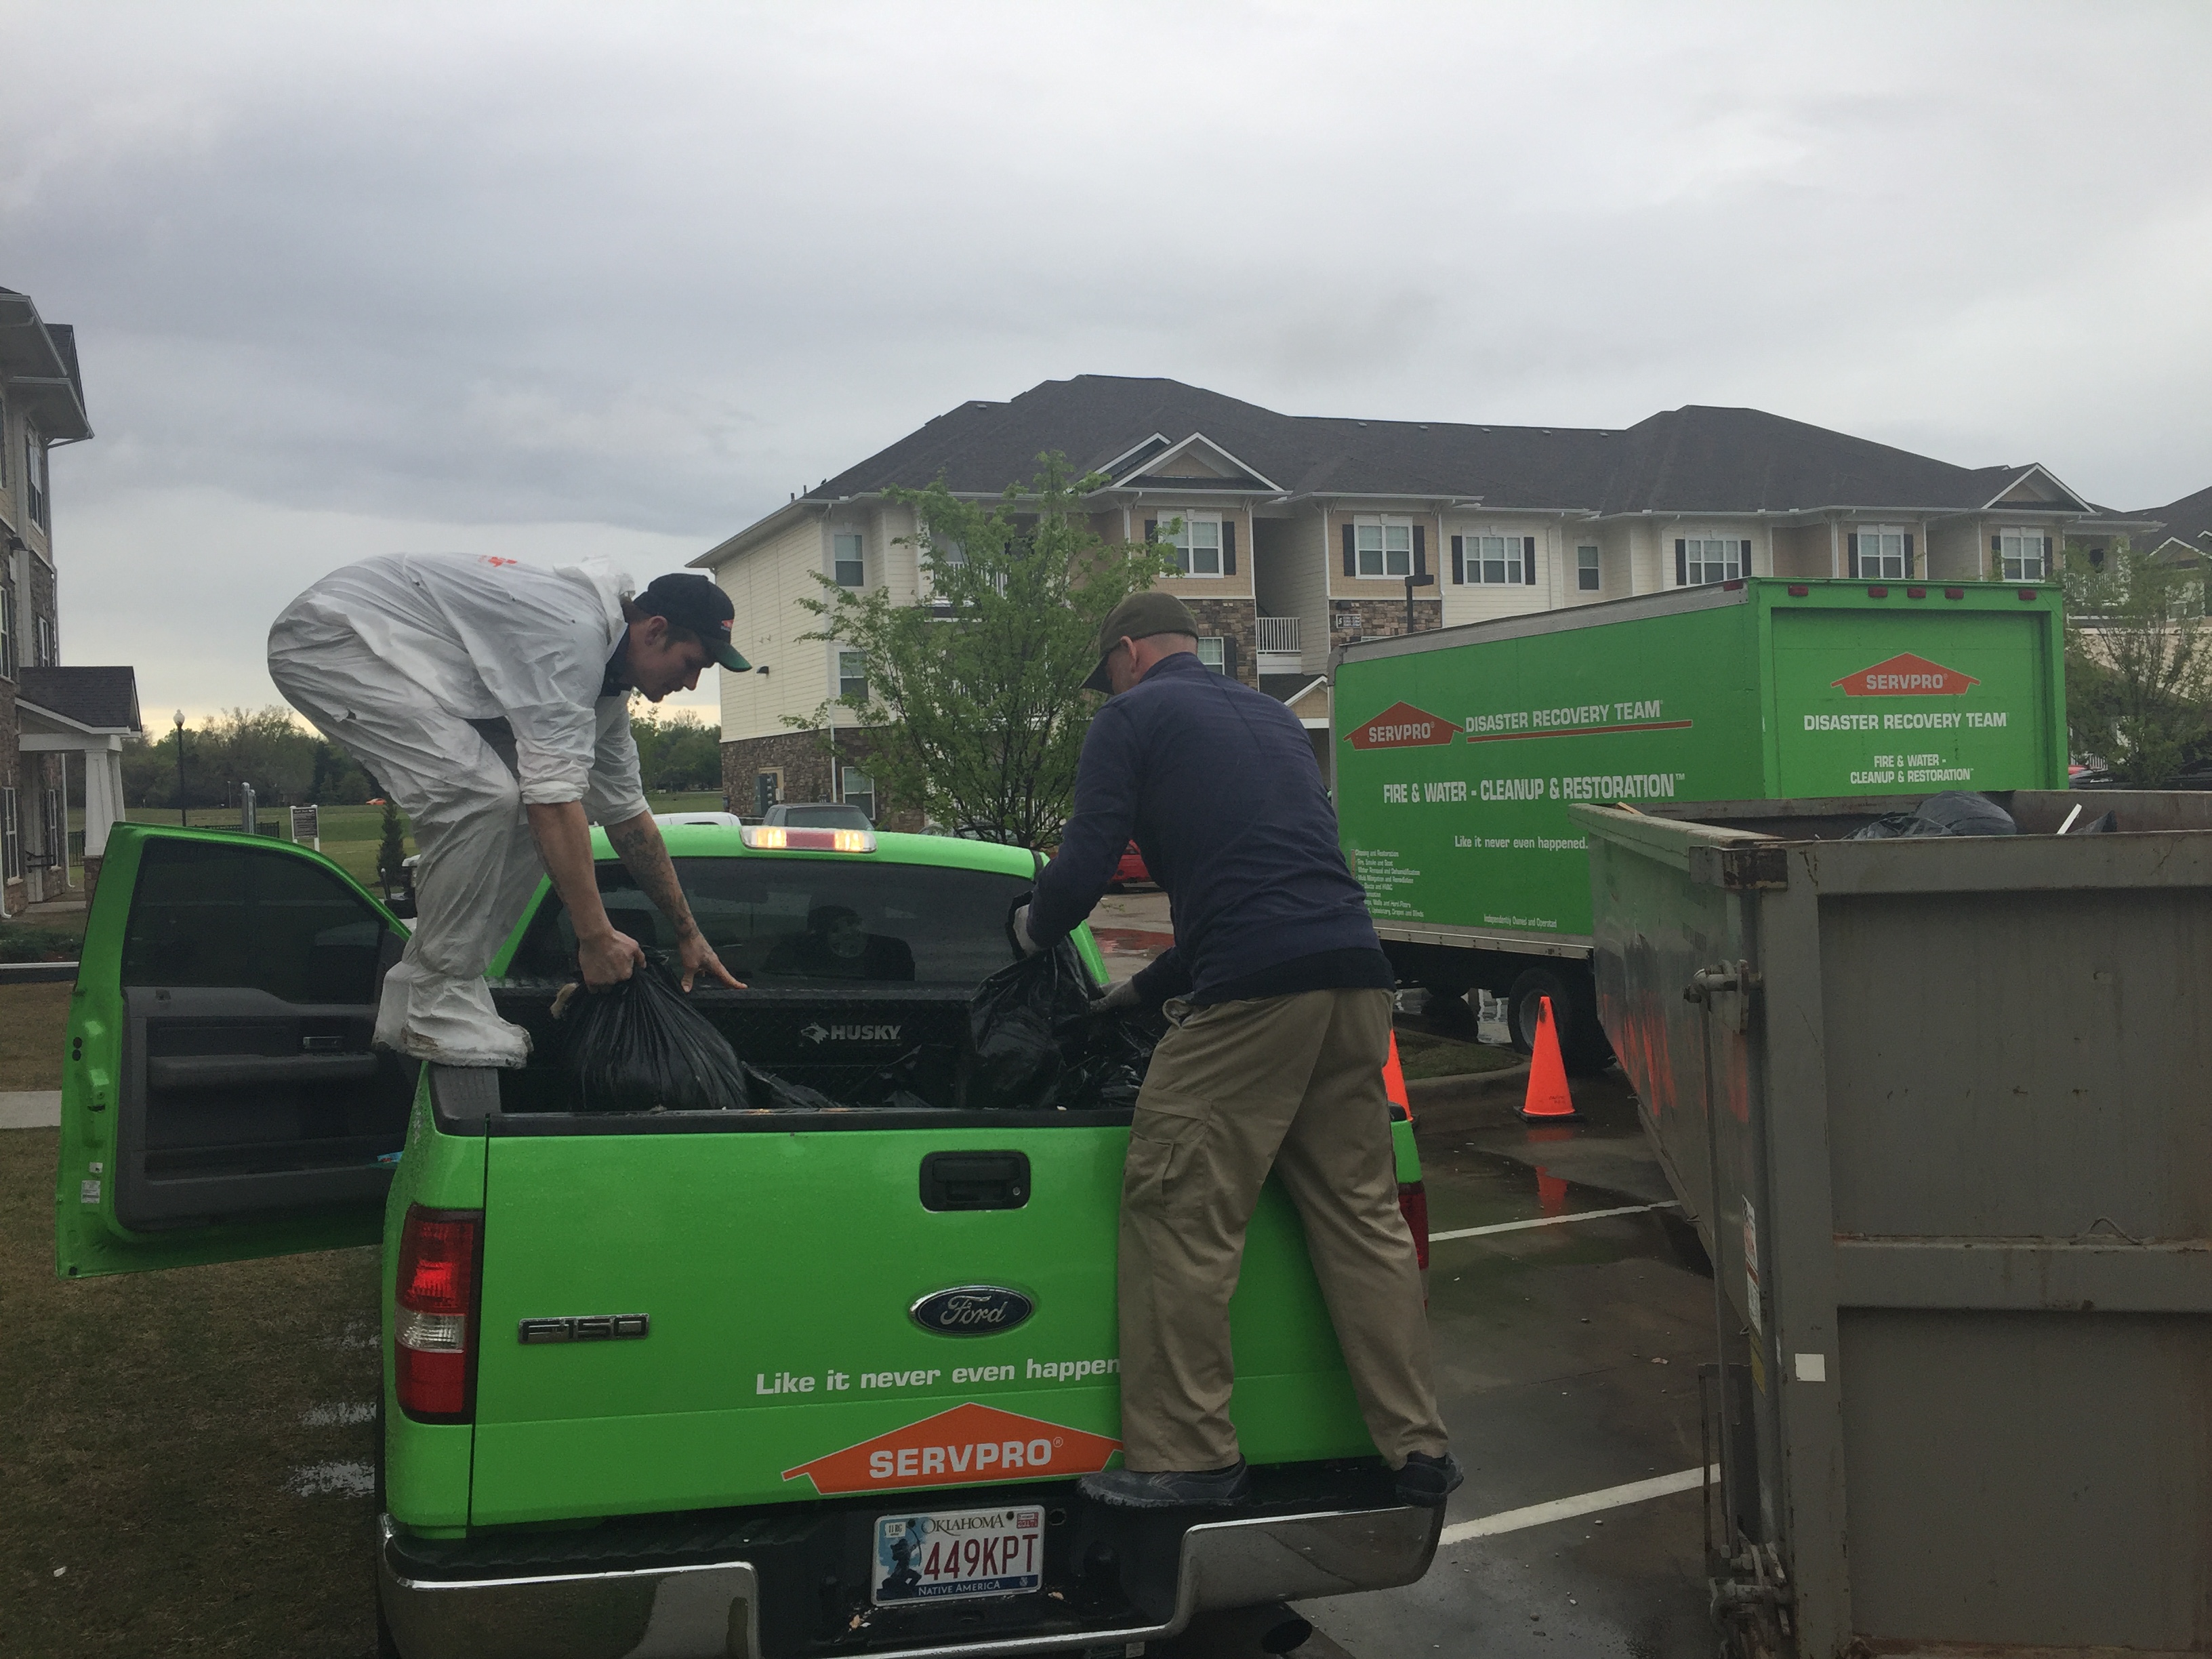 Working hard as usual! #SERVPRO